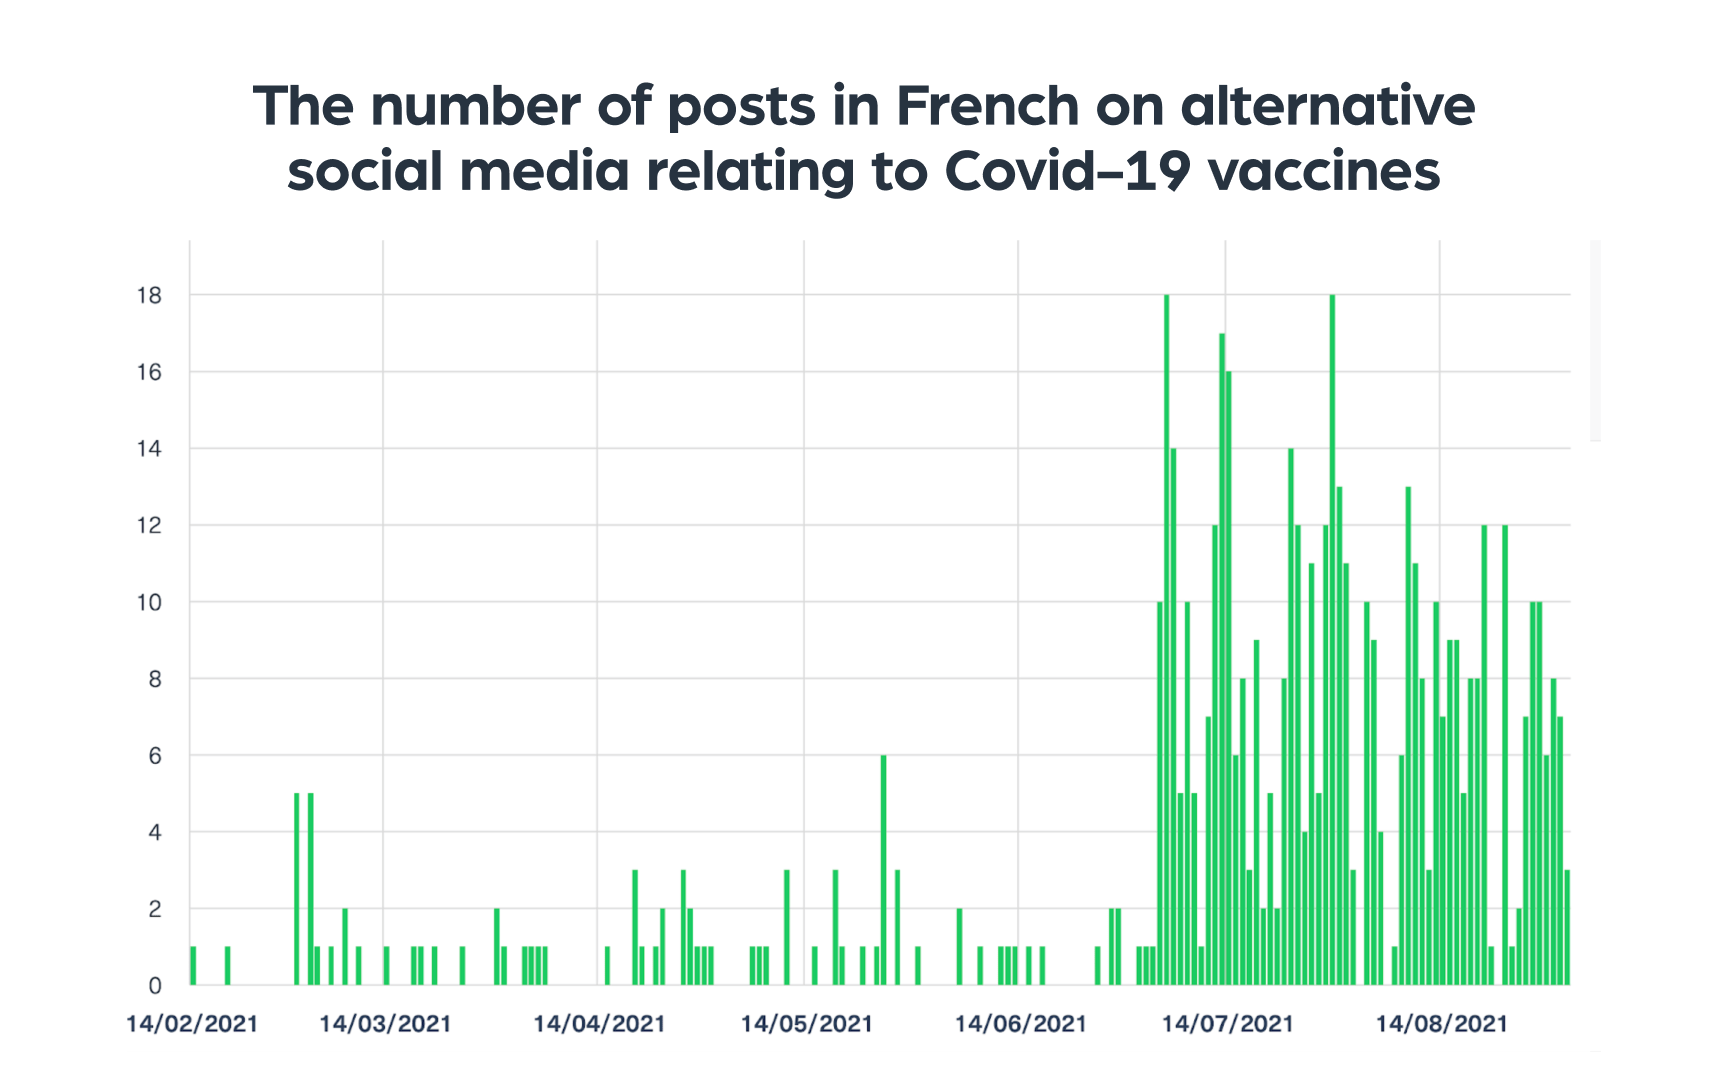 The number of posts in French on alternative social media relating to Covid-19 vaccines